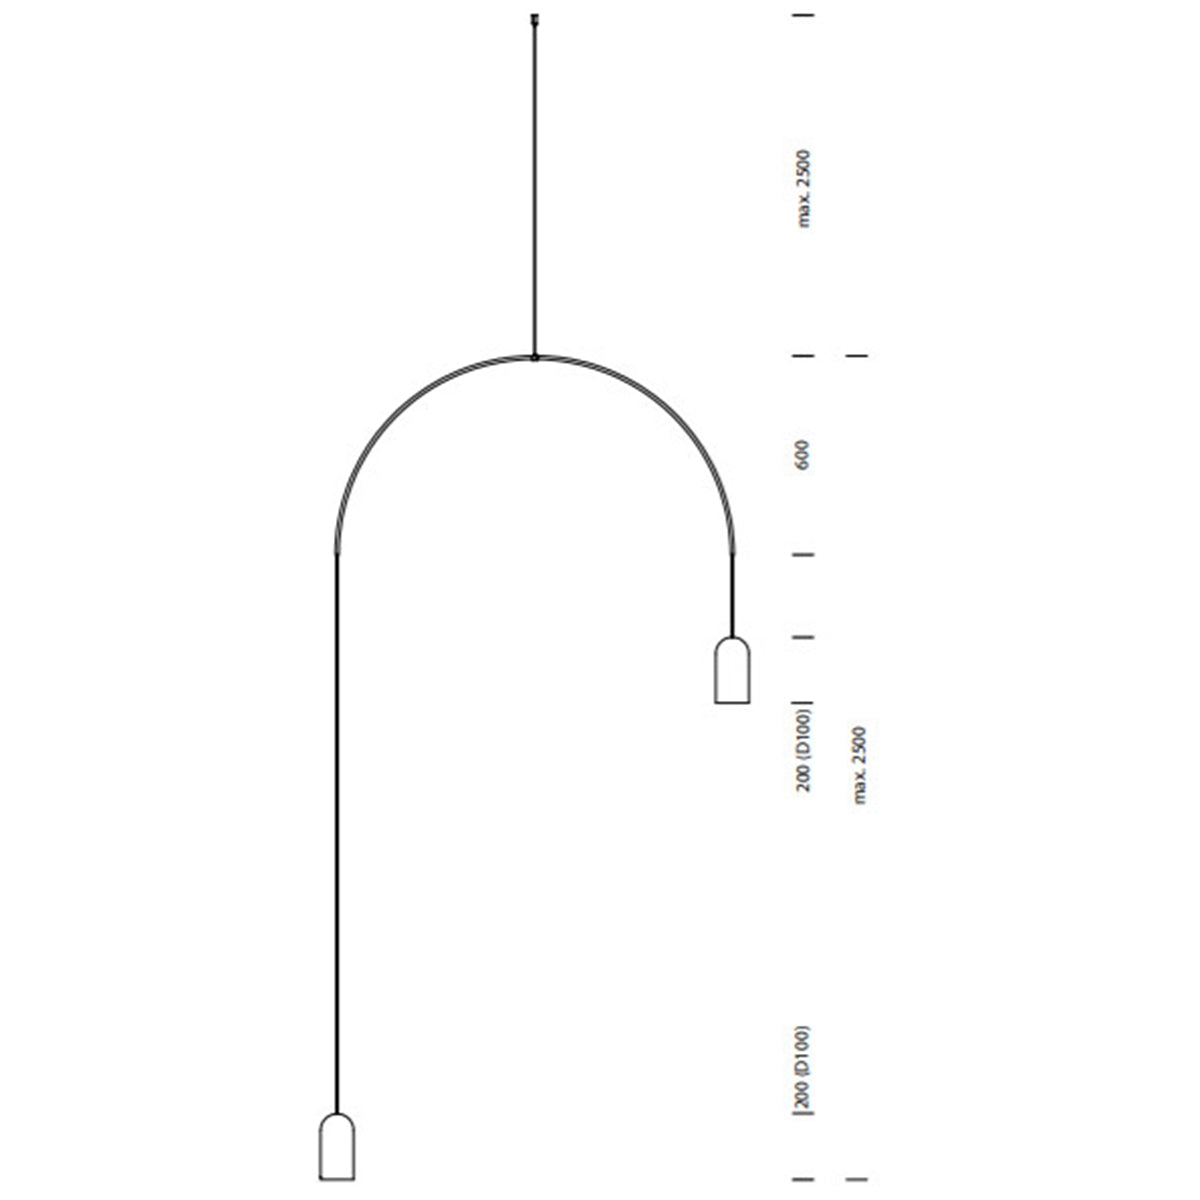 Bow Floor Lamp Specifications